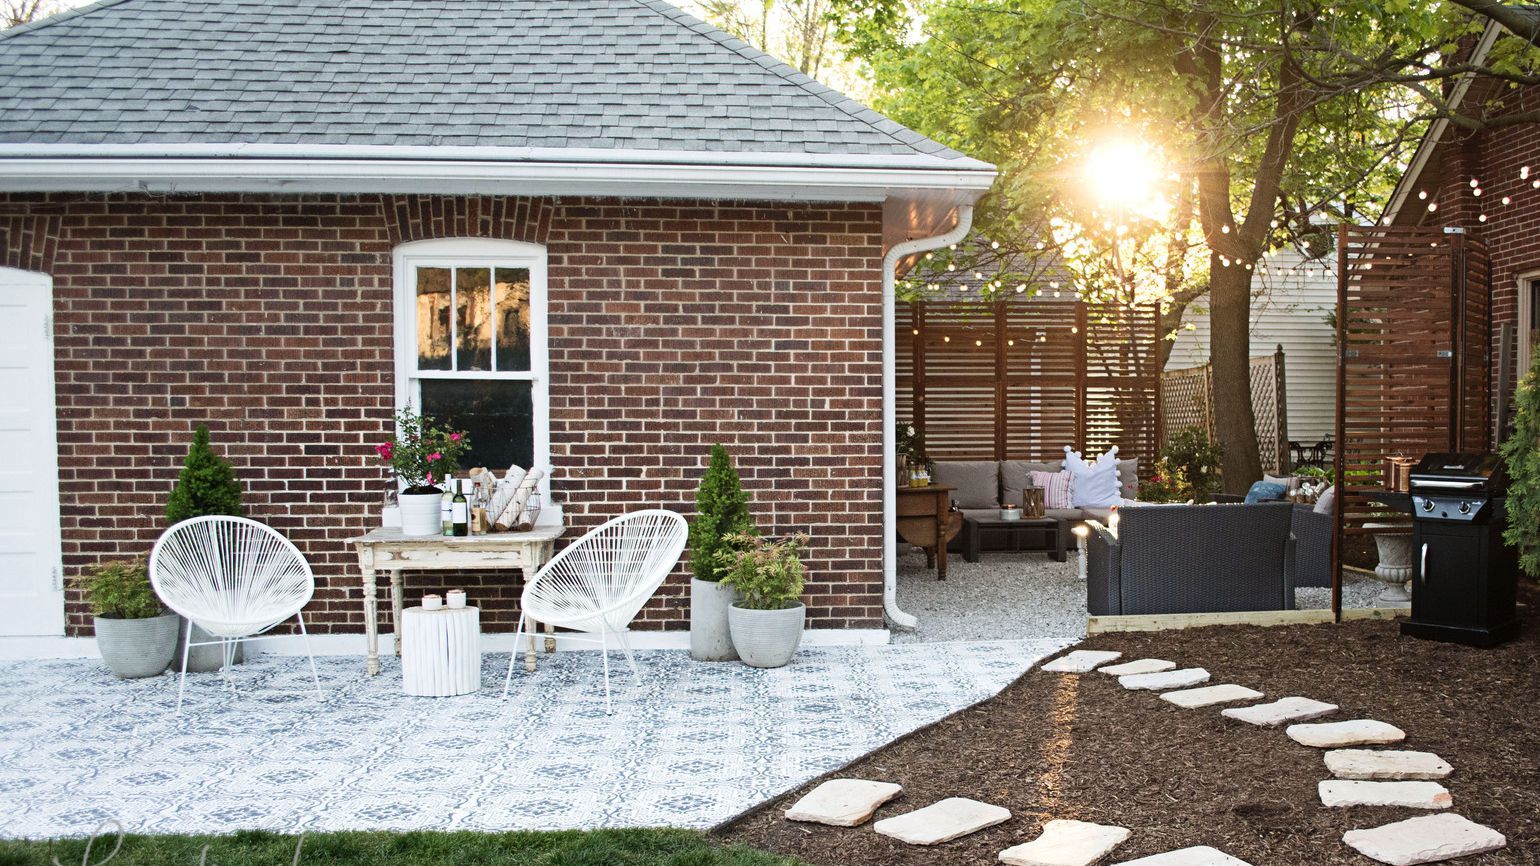 Brick home with two patio conversation areas brown wicker couches and white metal chairs